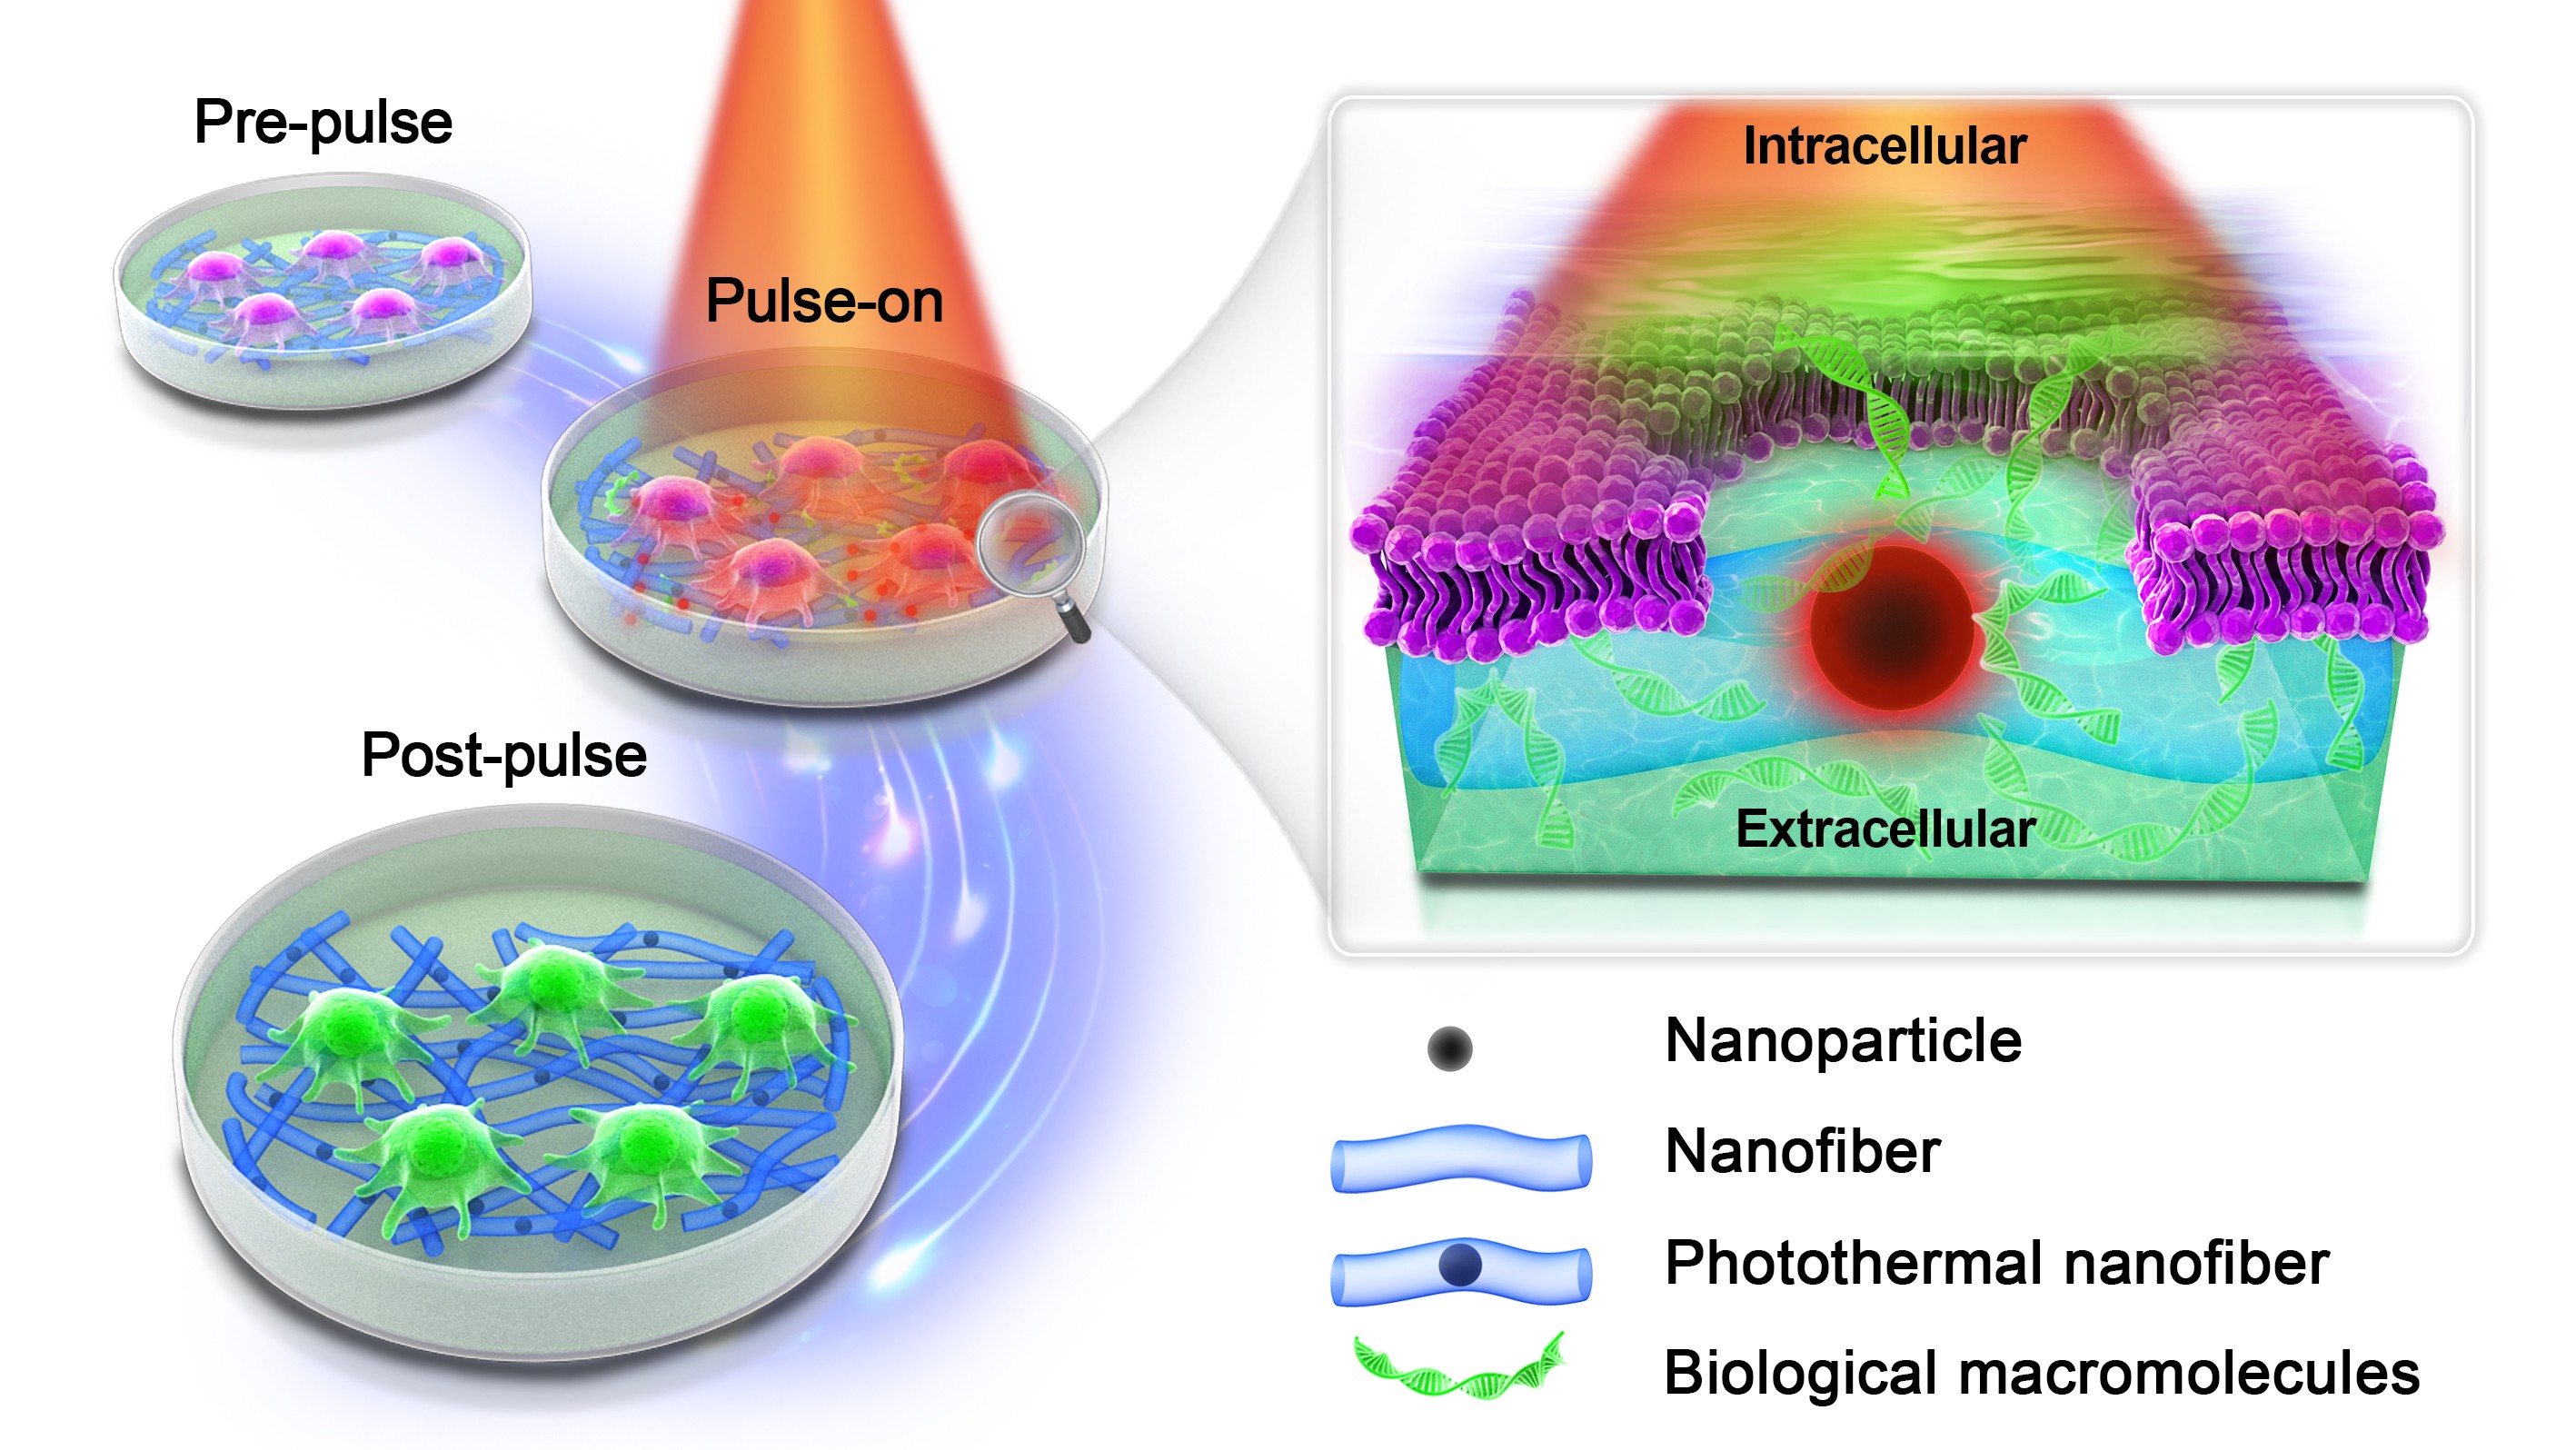 Schematic overview of intracellular delivery by membrane permeabilization with photothermal nanofibers